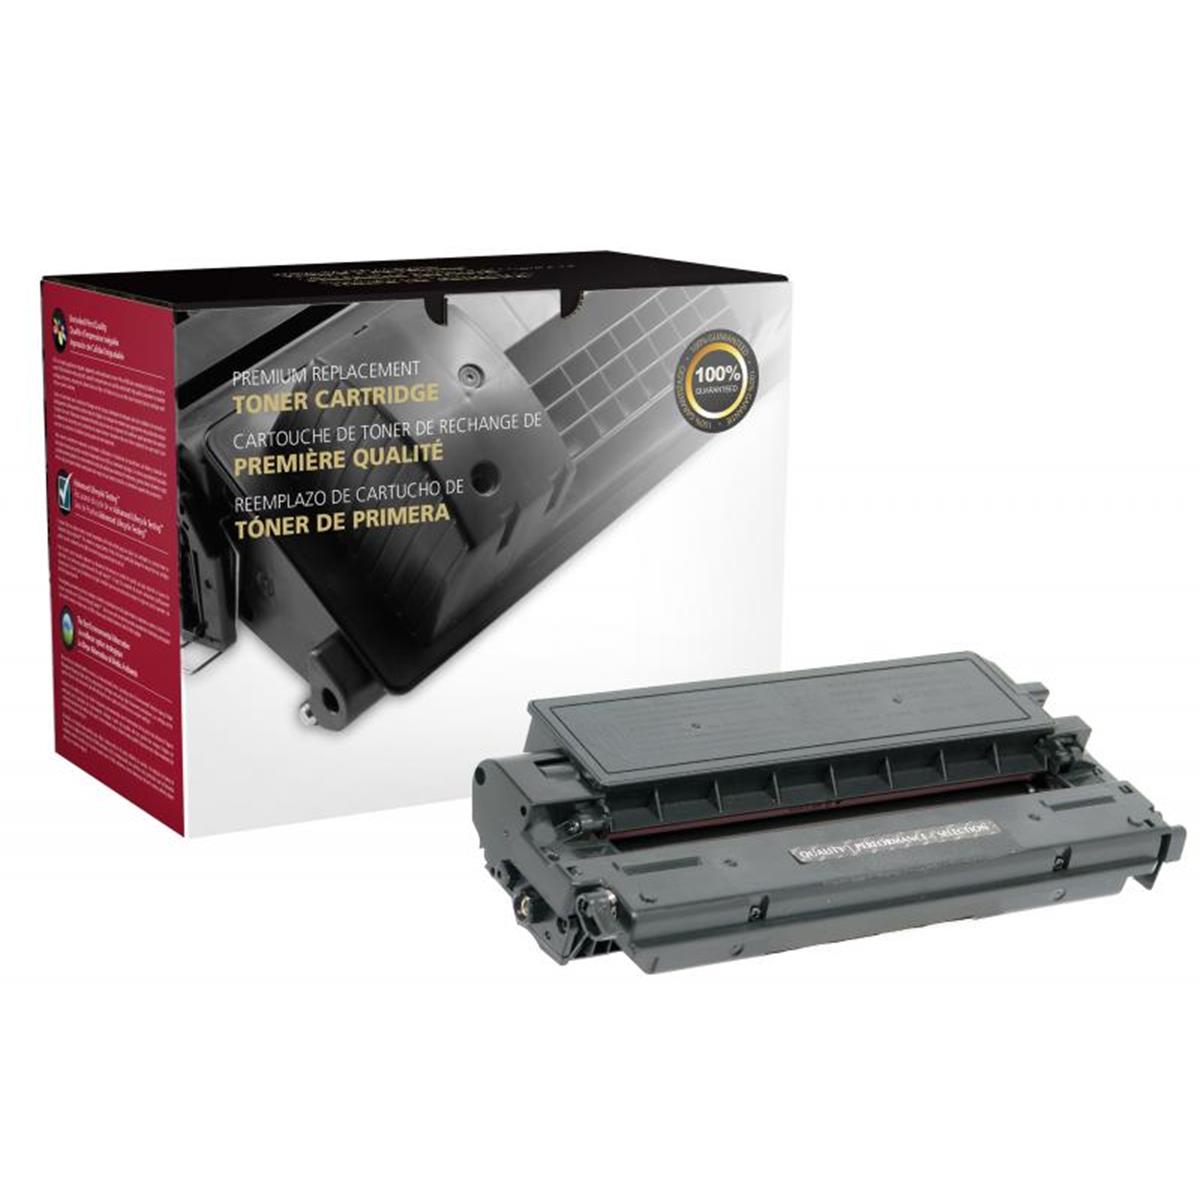 Picture of Canon 200024 High Yield Toner Cartridge for 1491A002AA-E40